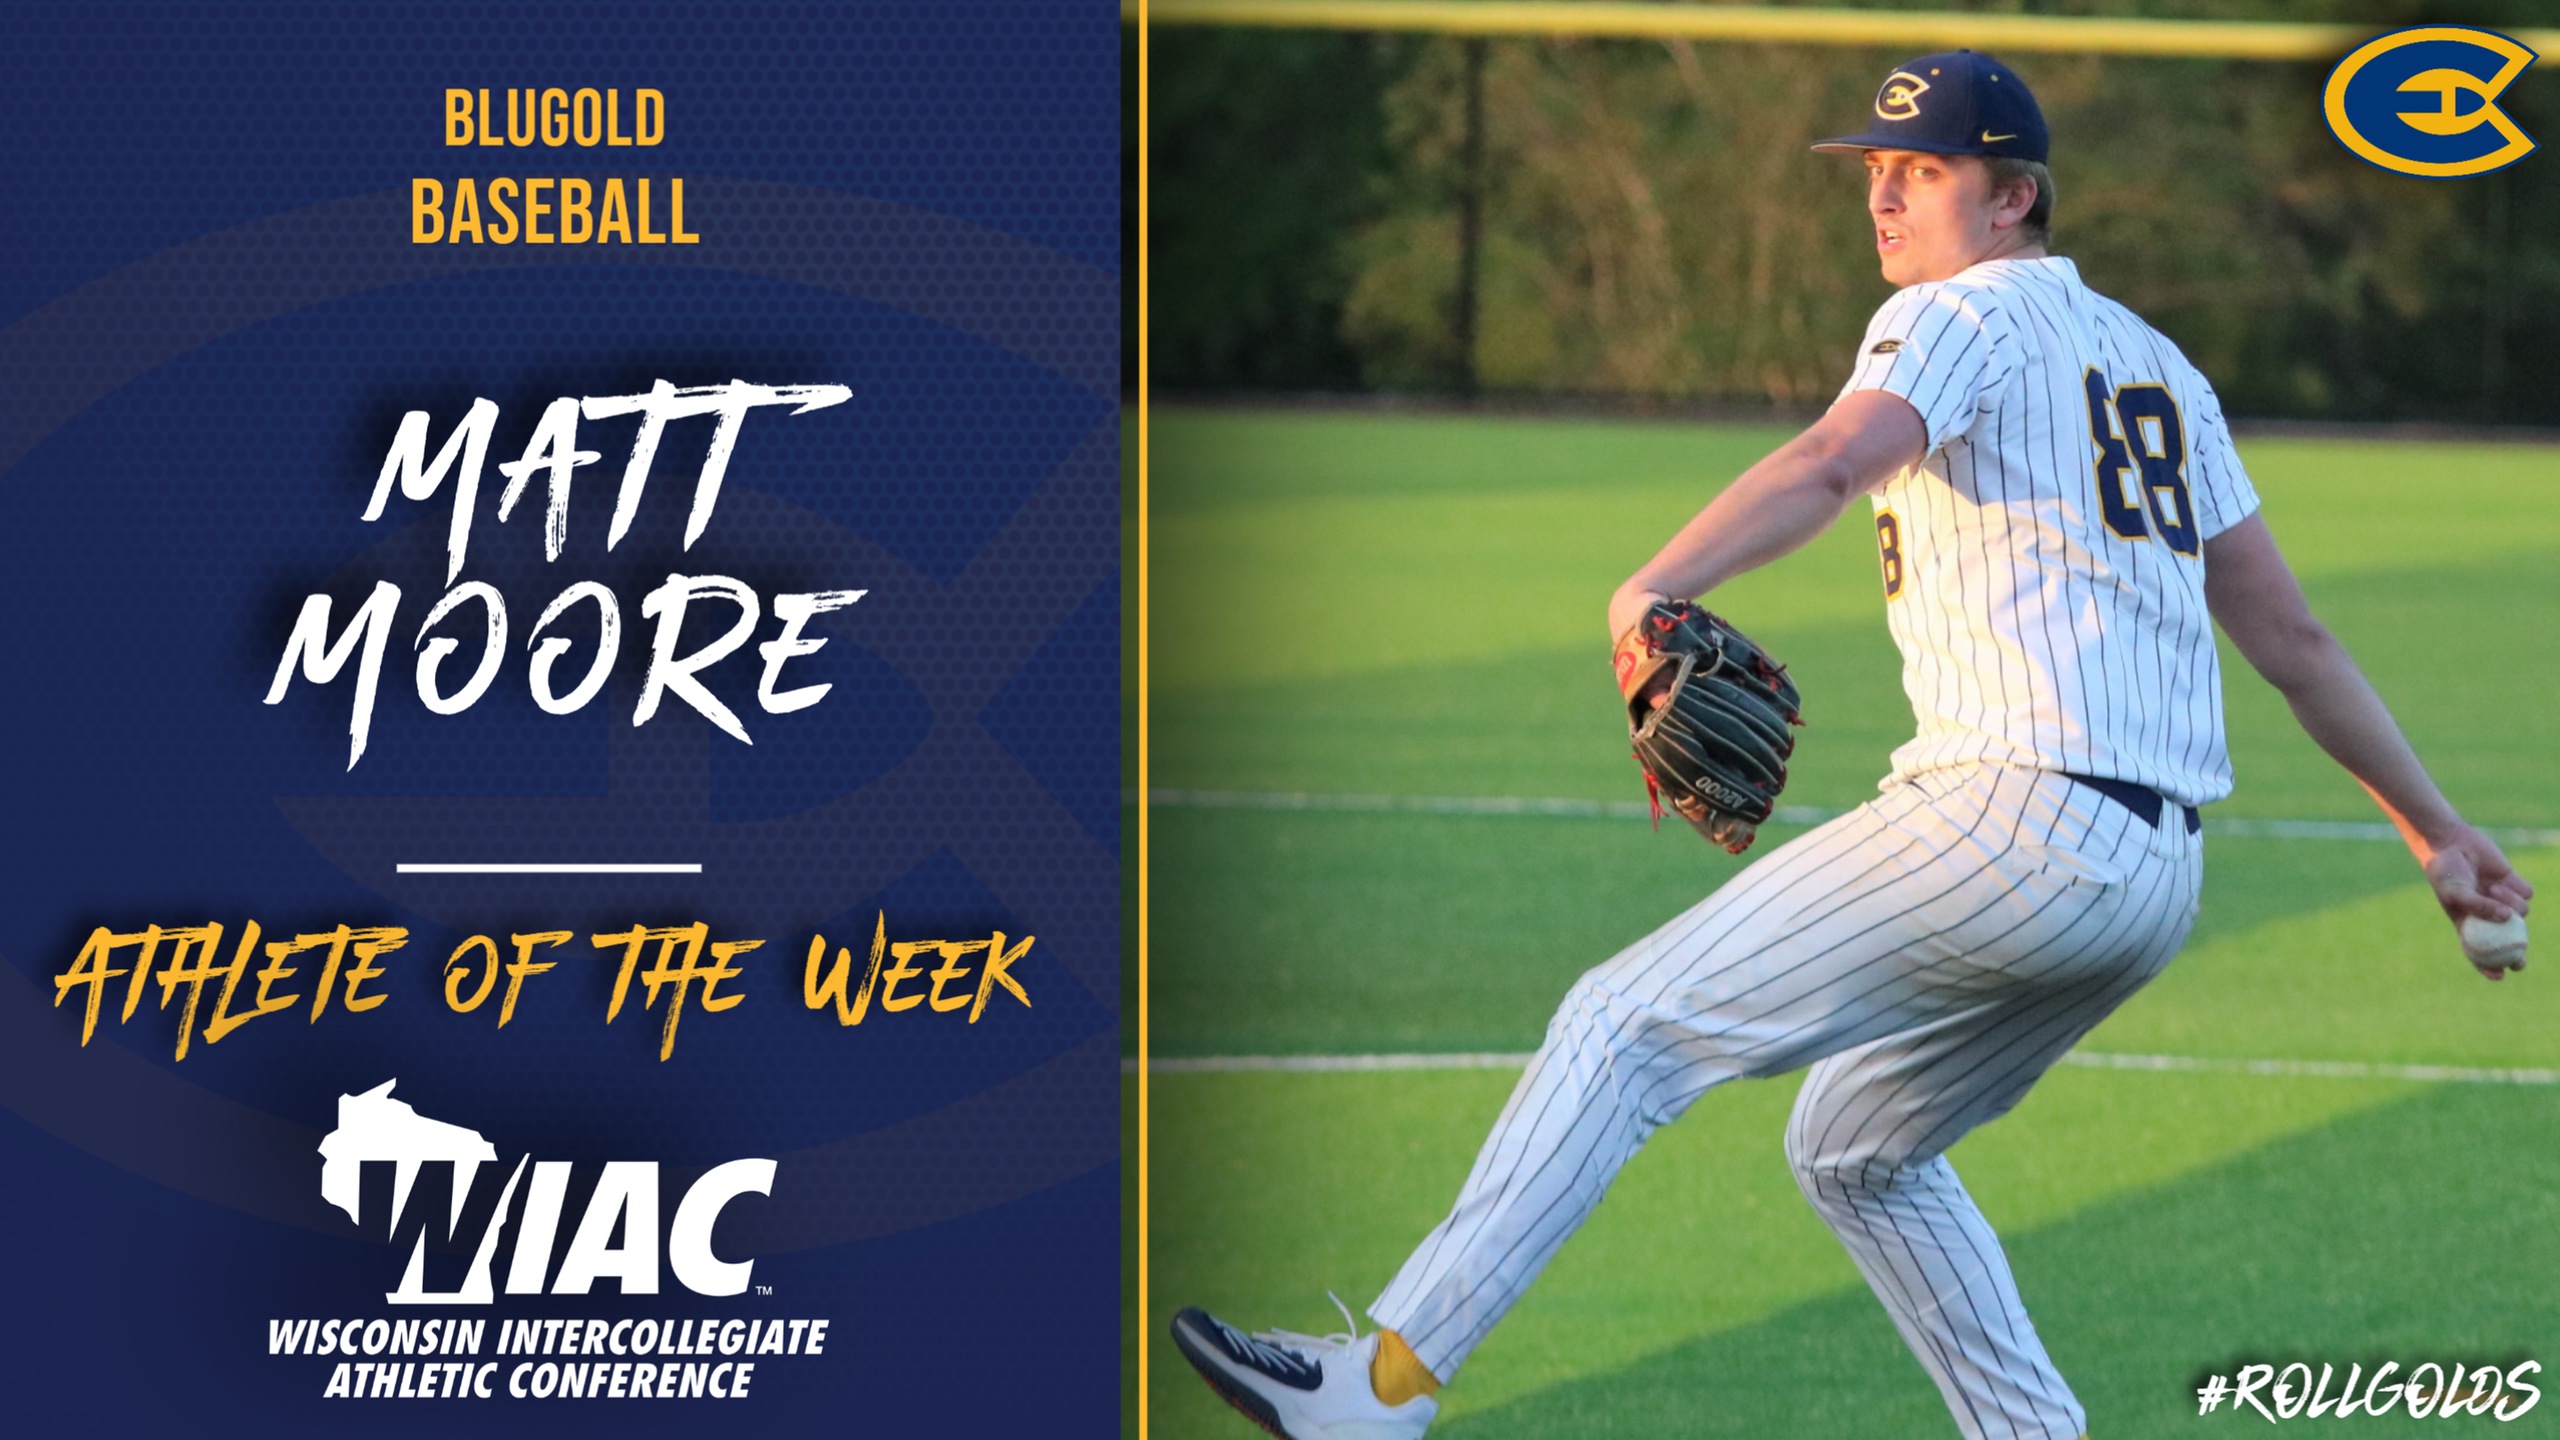 Moore tabbed as WIAC Pitcher of the Week